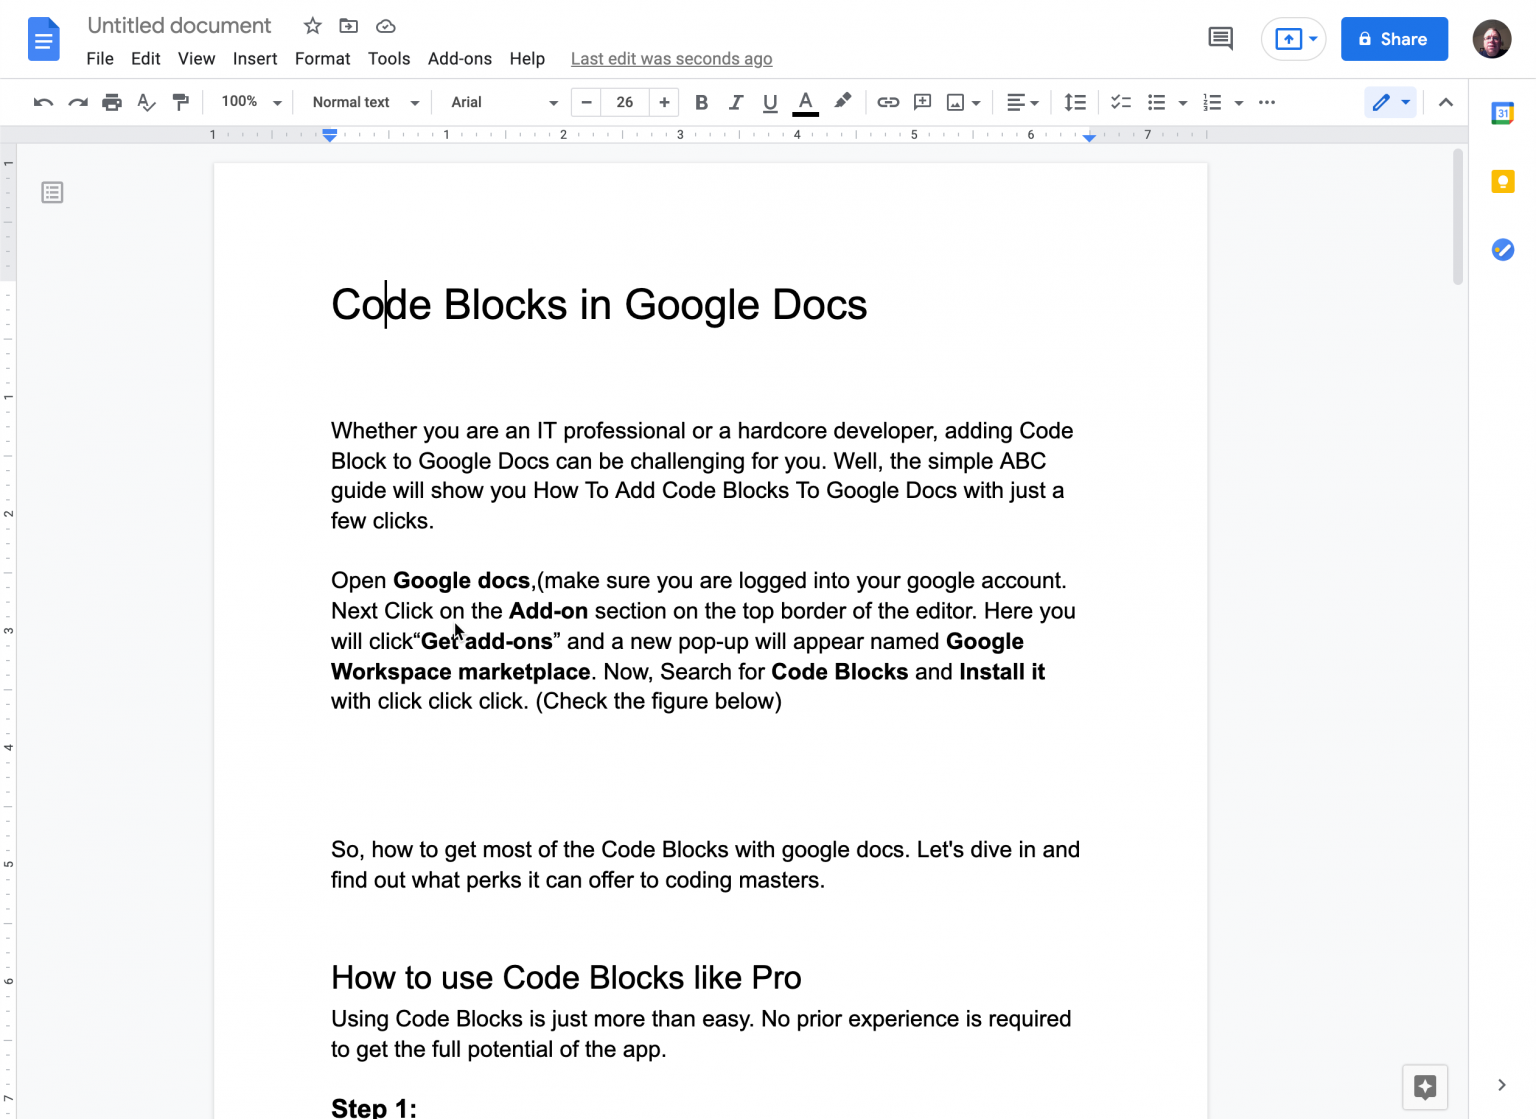 how to put footnotes in google docs